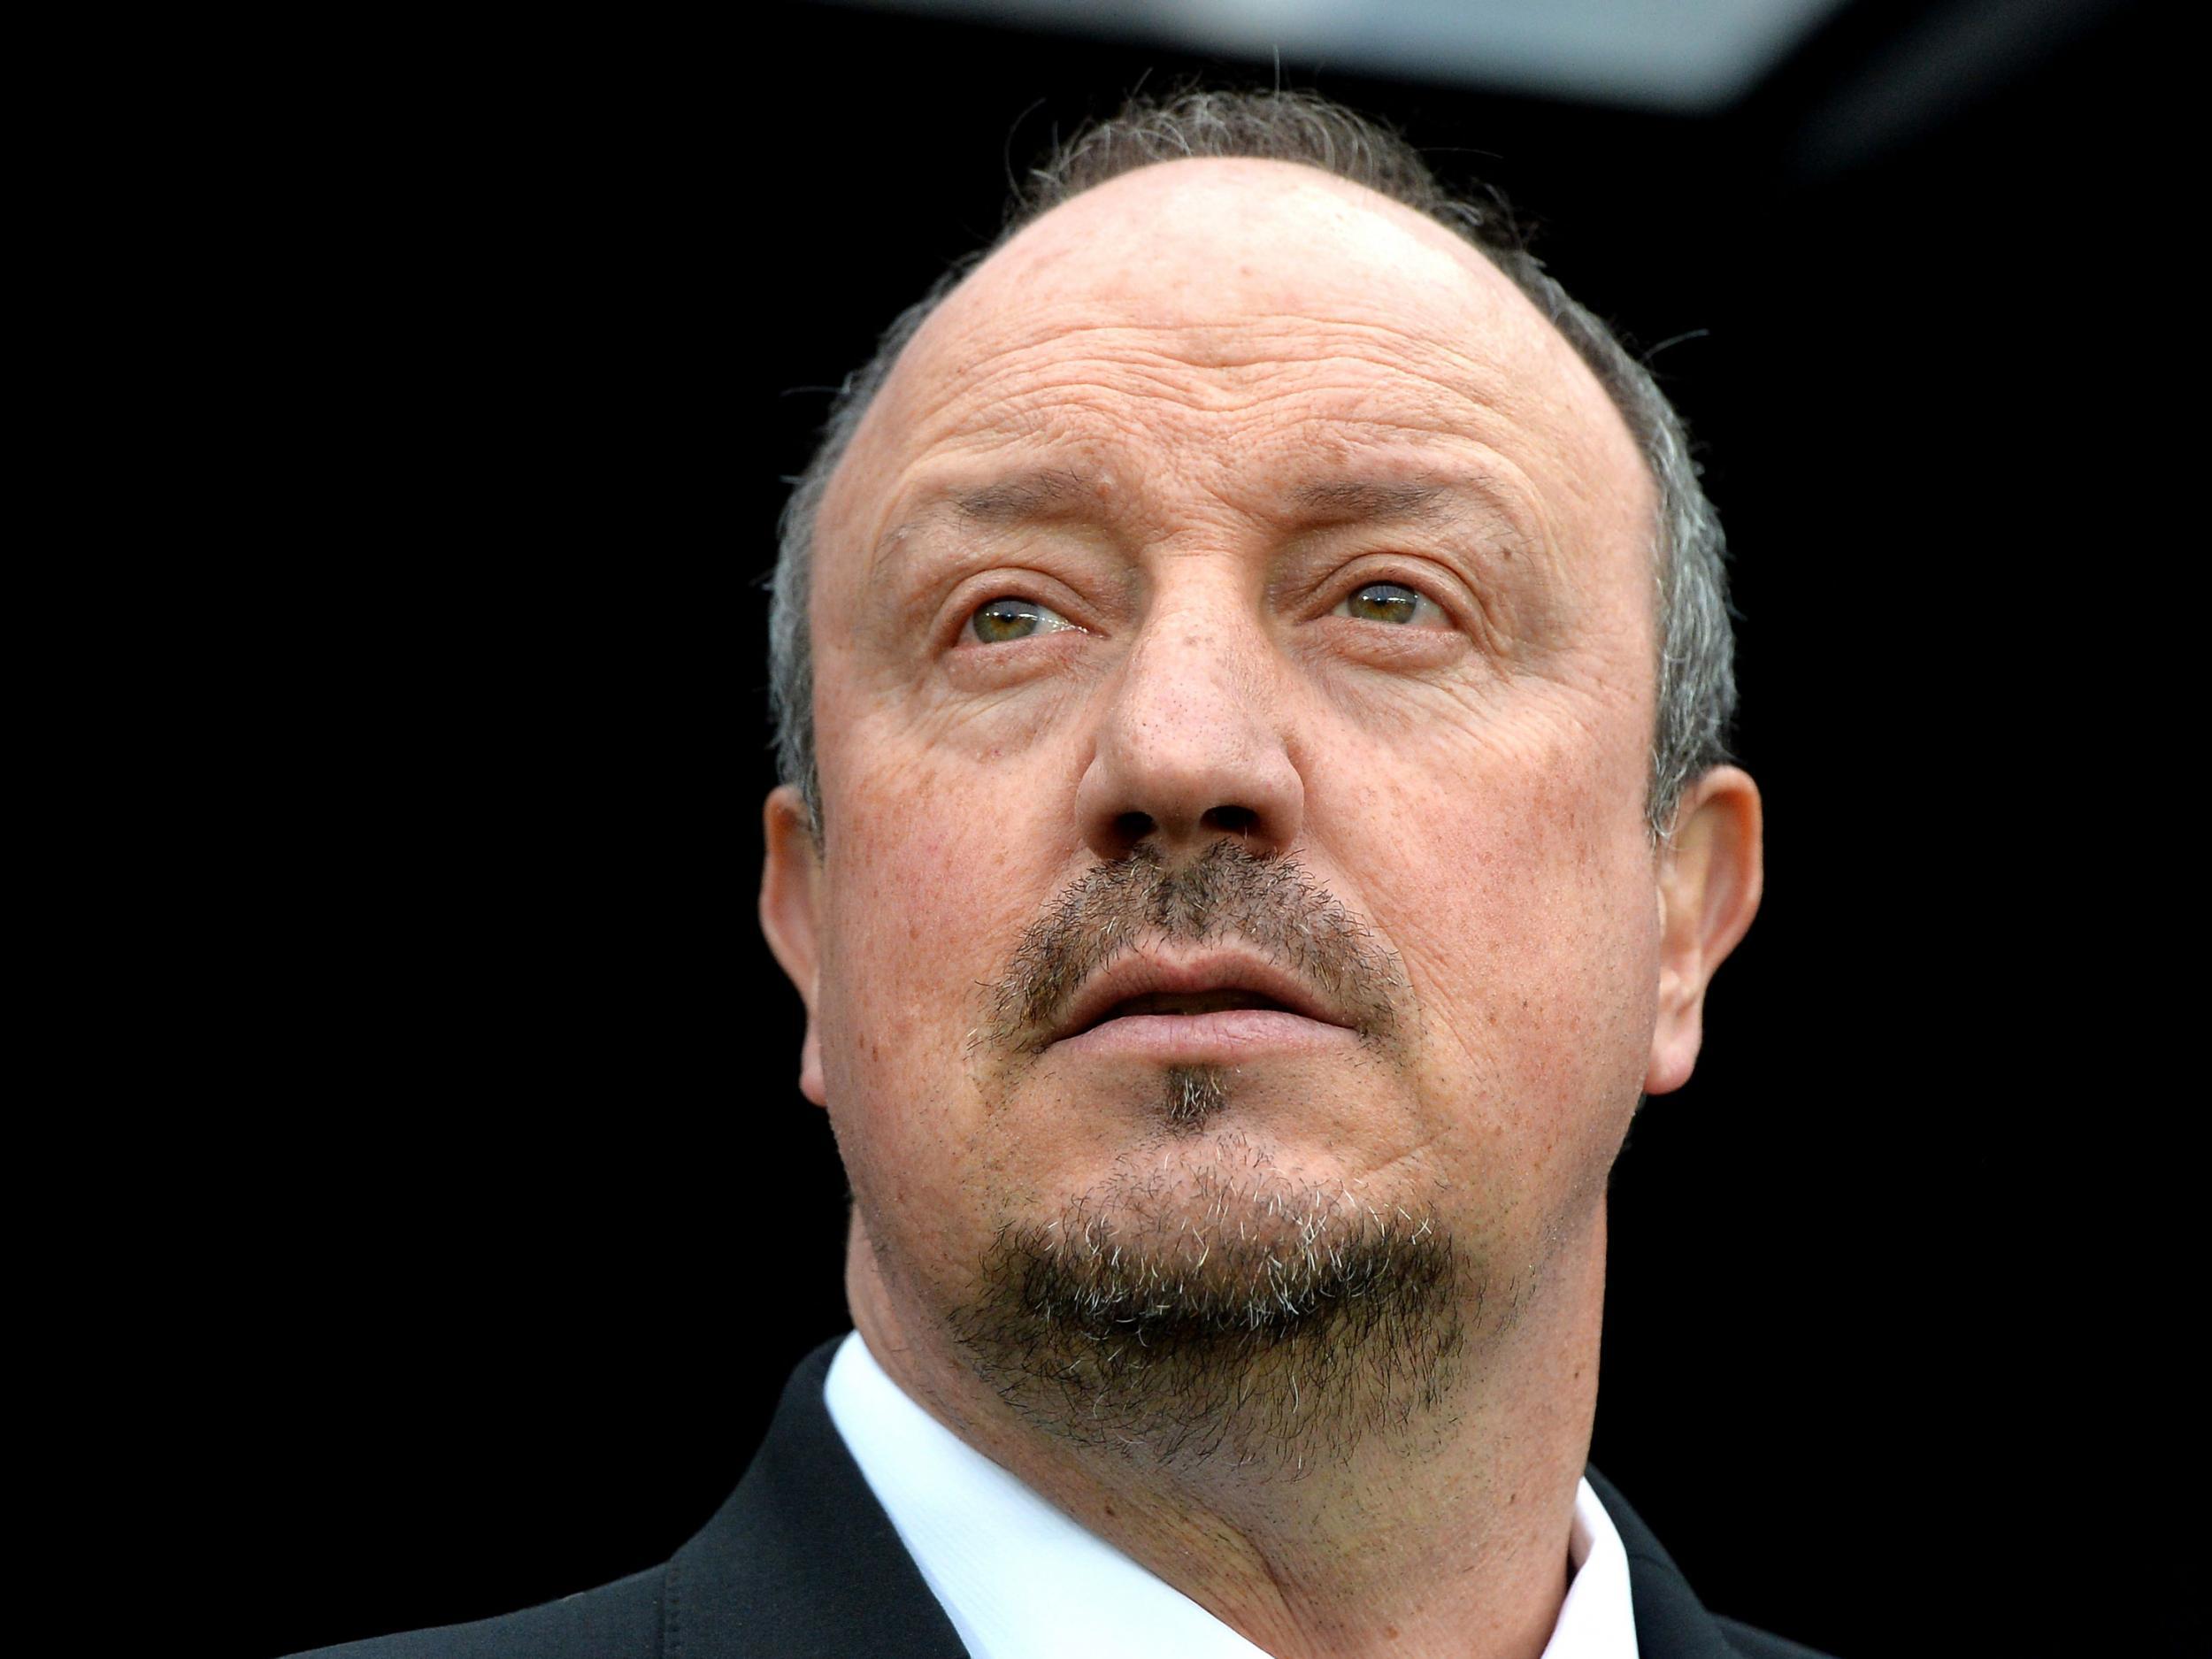 Benitez is aware the club needs to invest this summer